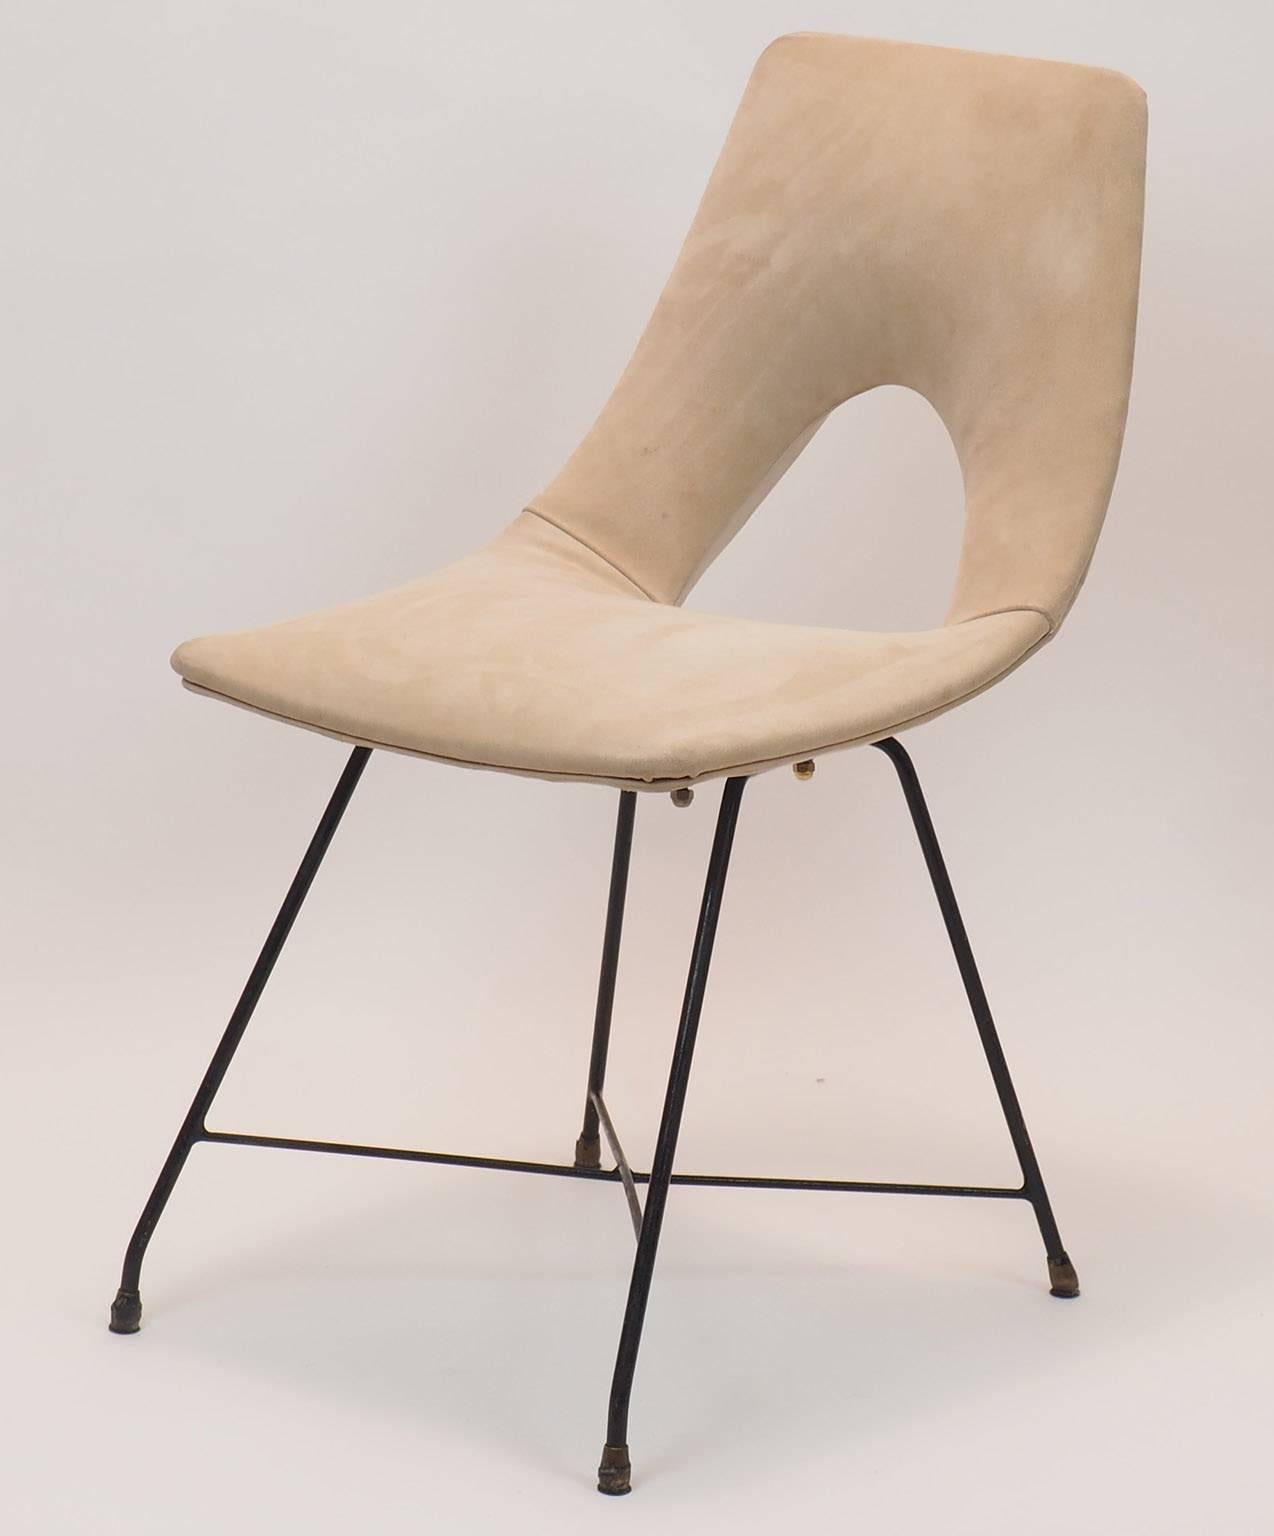 Mid-20th Century Italian Desk or Side Chair Designed by Augusto Bozzi for Saporiti, 1950s